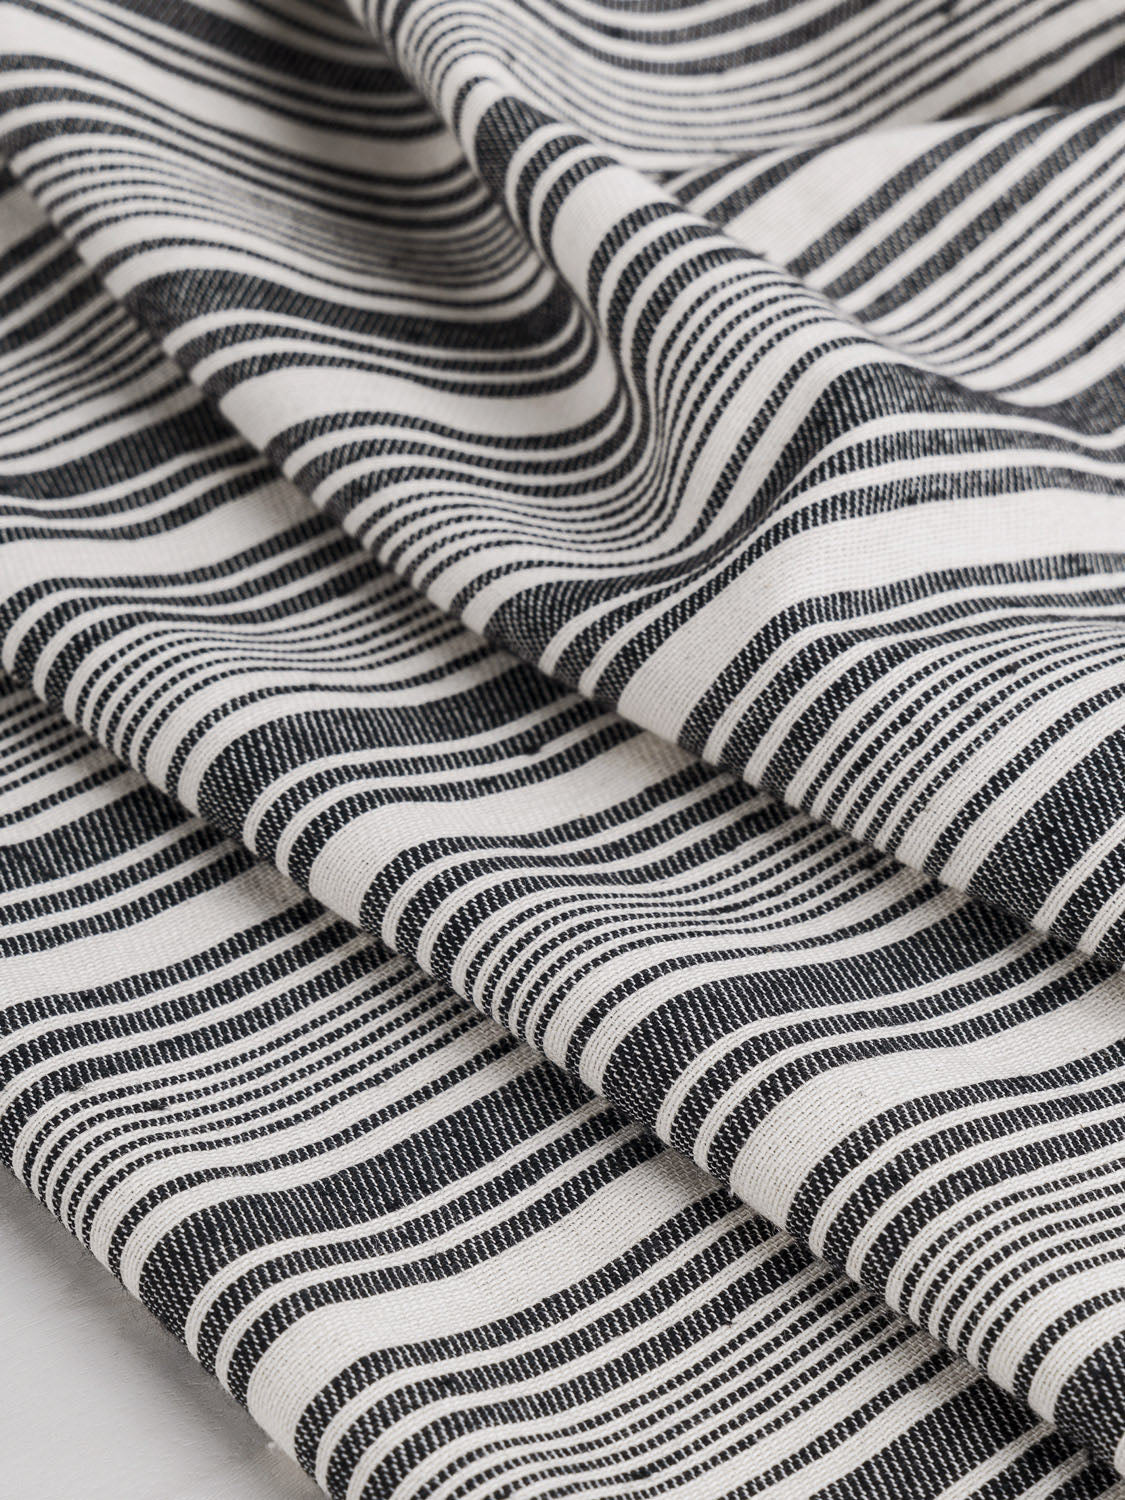 Striped Textured Recycled Cotton - Blue + Cream